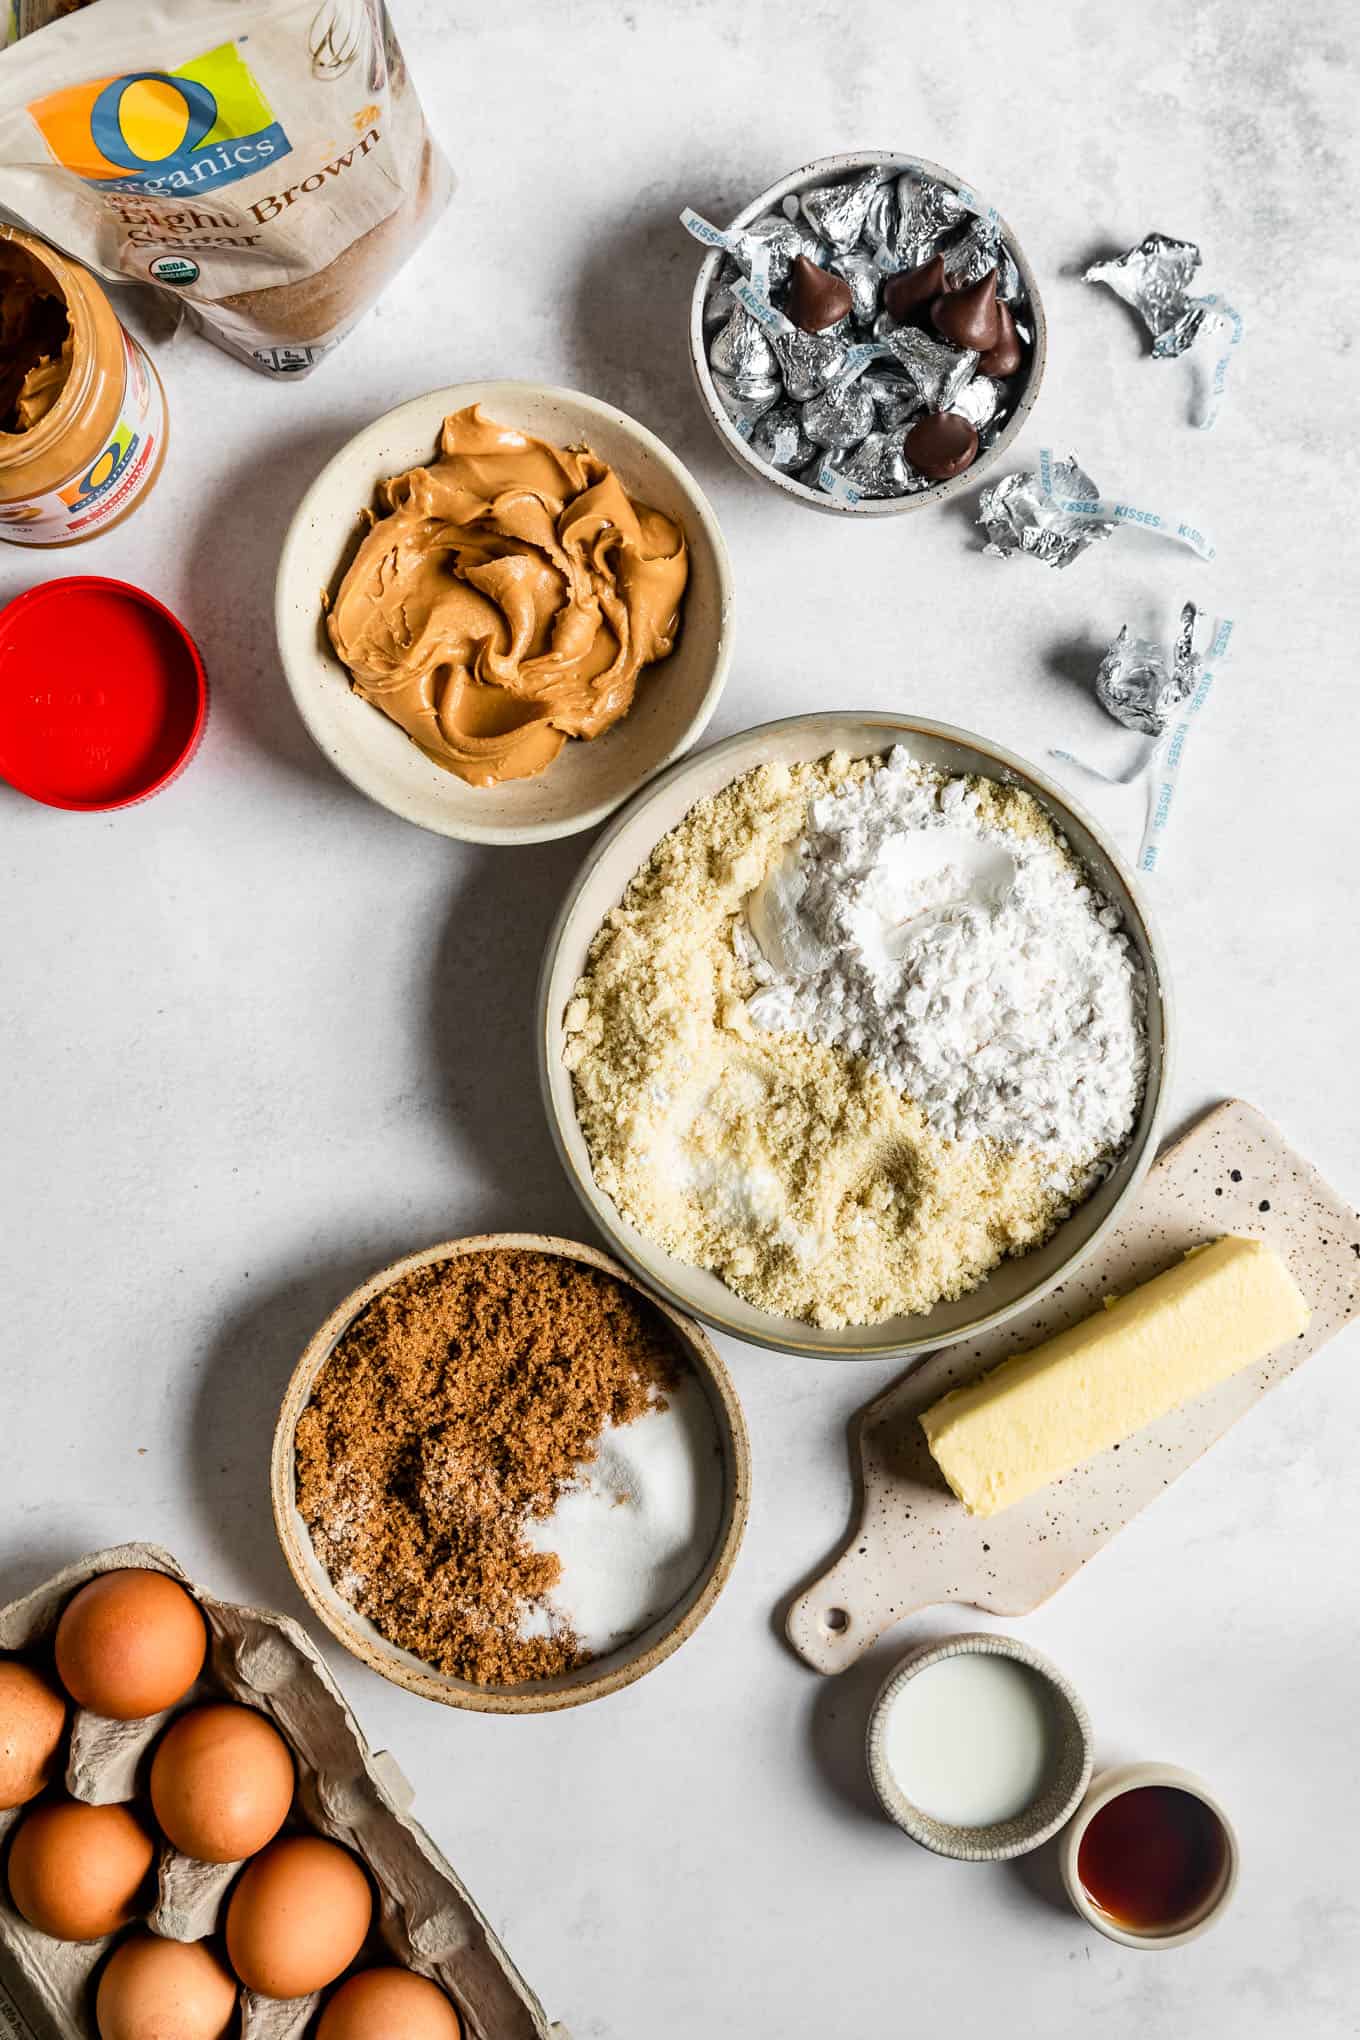 Ingredients for Gluten-Free Peanut Butter Blossoms